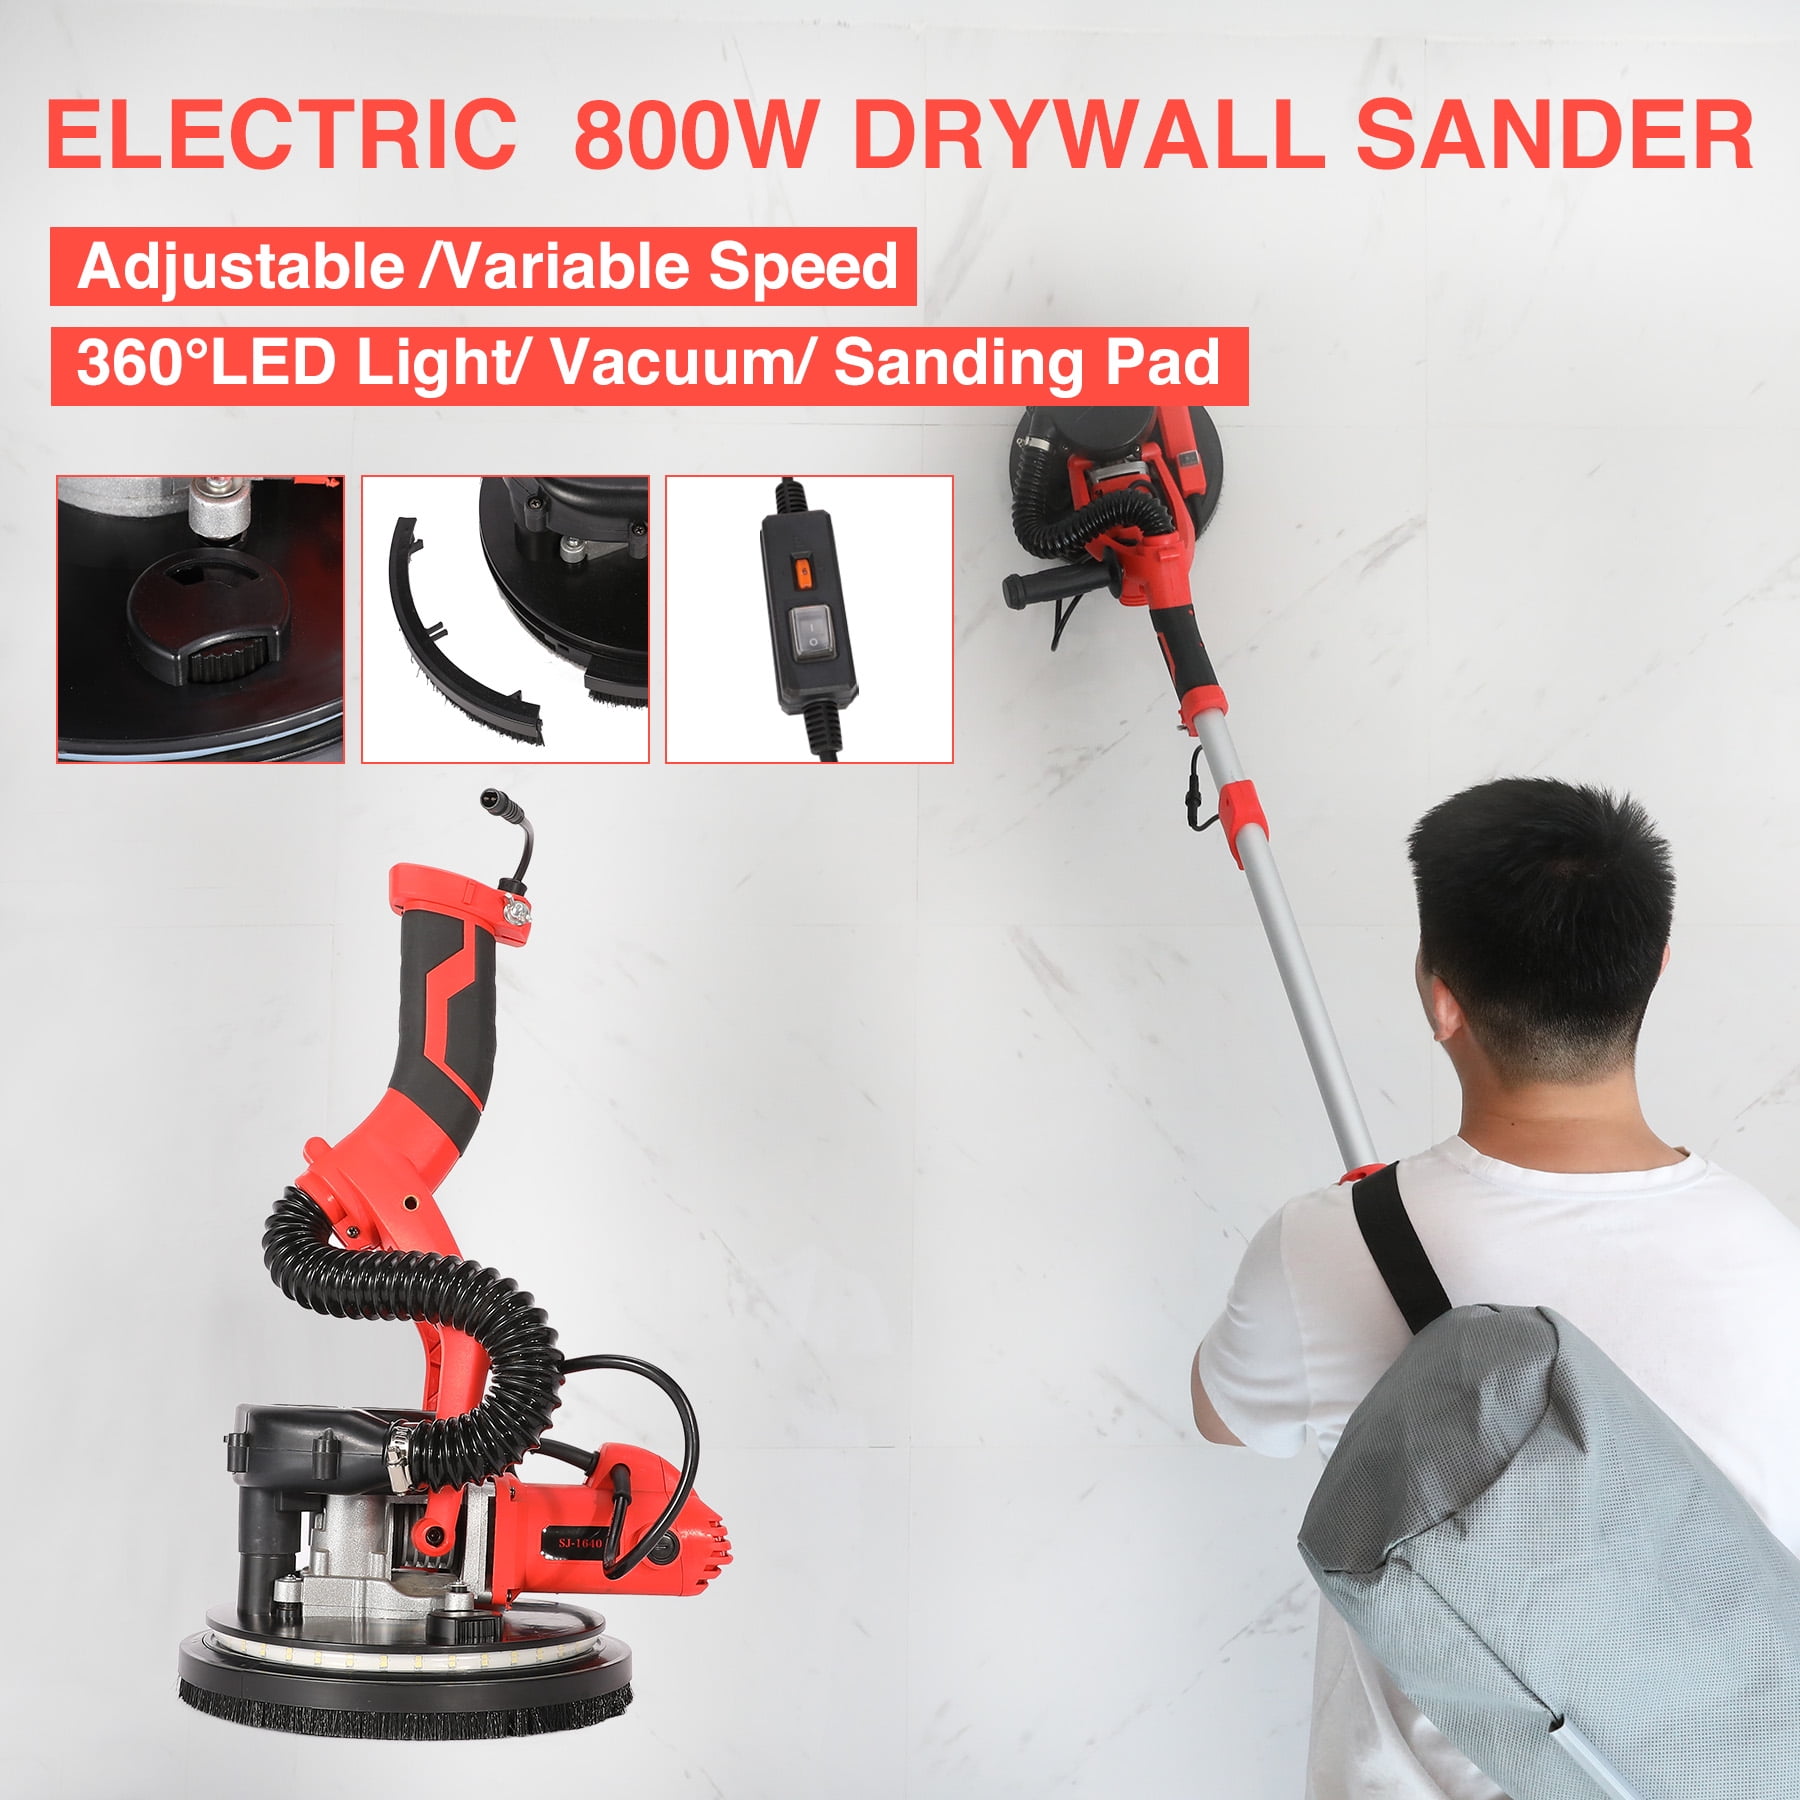 Details about   Preenex Electric 6 Speed Drywall Sander w Foldable Handle for Ceiling Floor More 